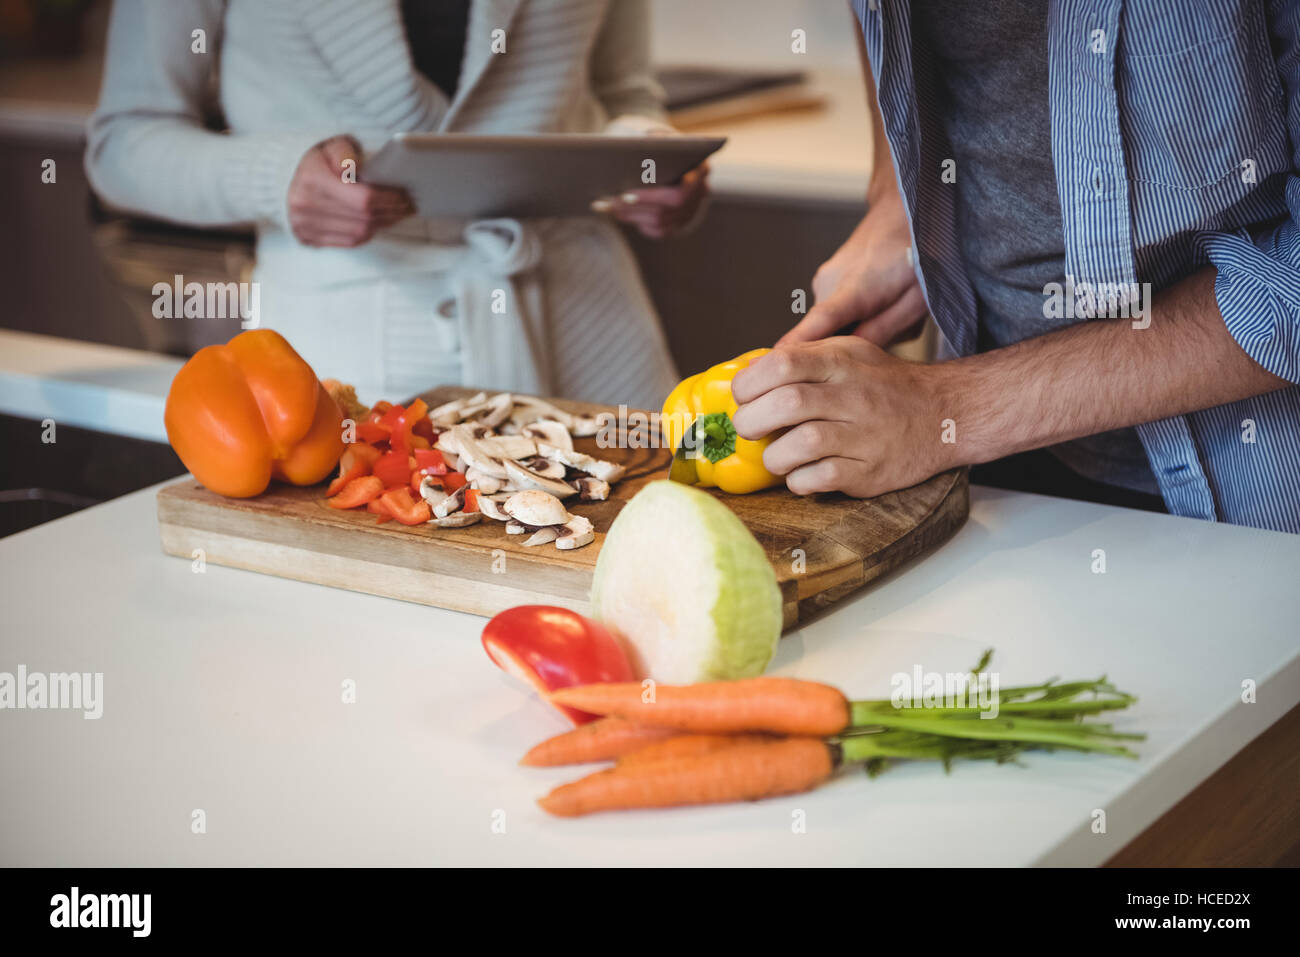 Couple using digital tablet while chopping vegetables in kitchen Stock Photo